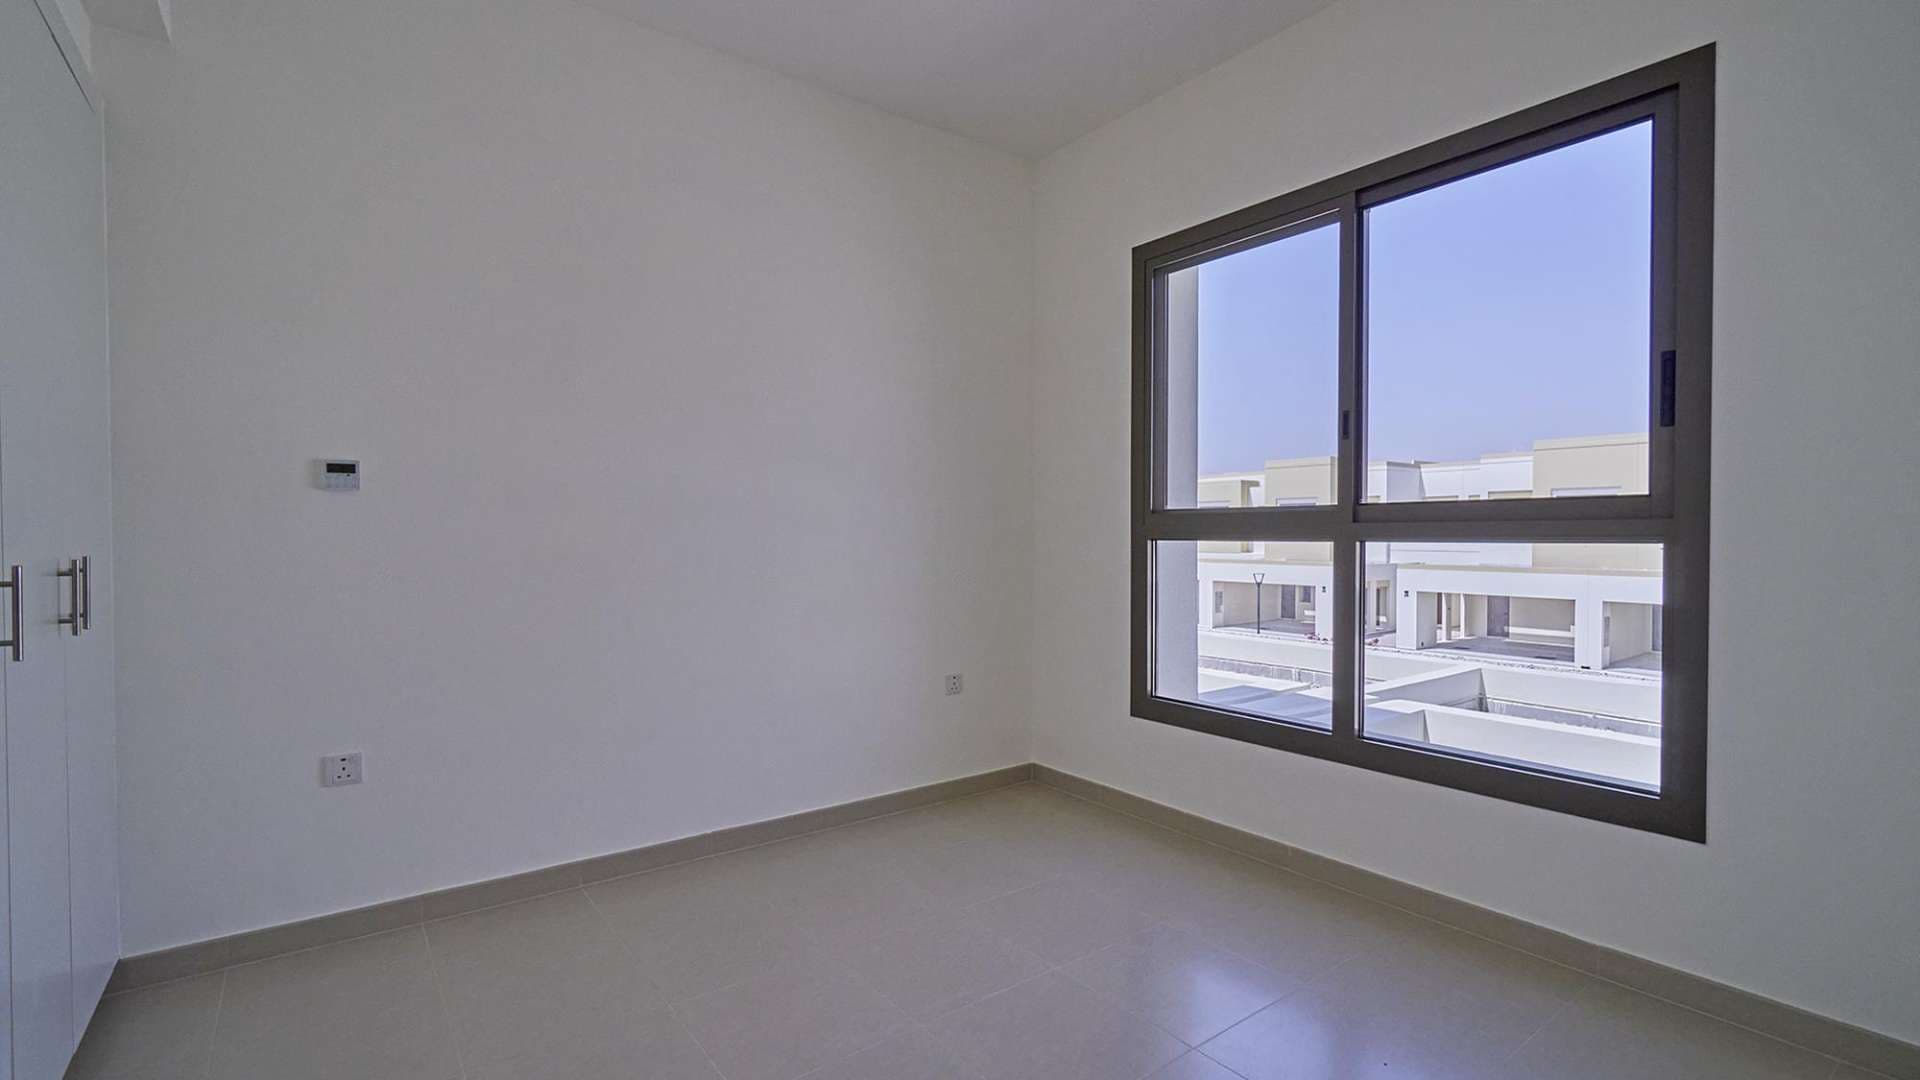 3 Bedroom Townhouse For Sale Noor Townhouses Lp08195 106a3688ad403b00.jpg